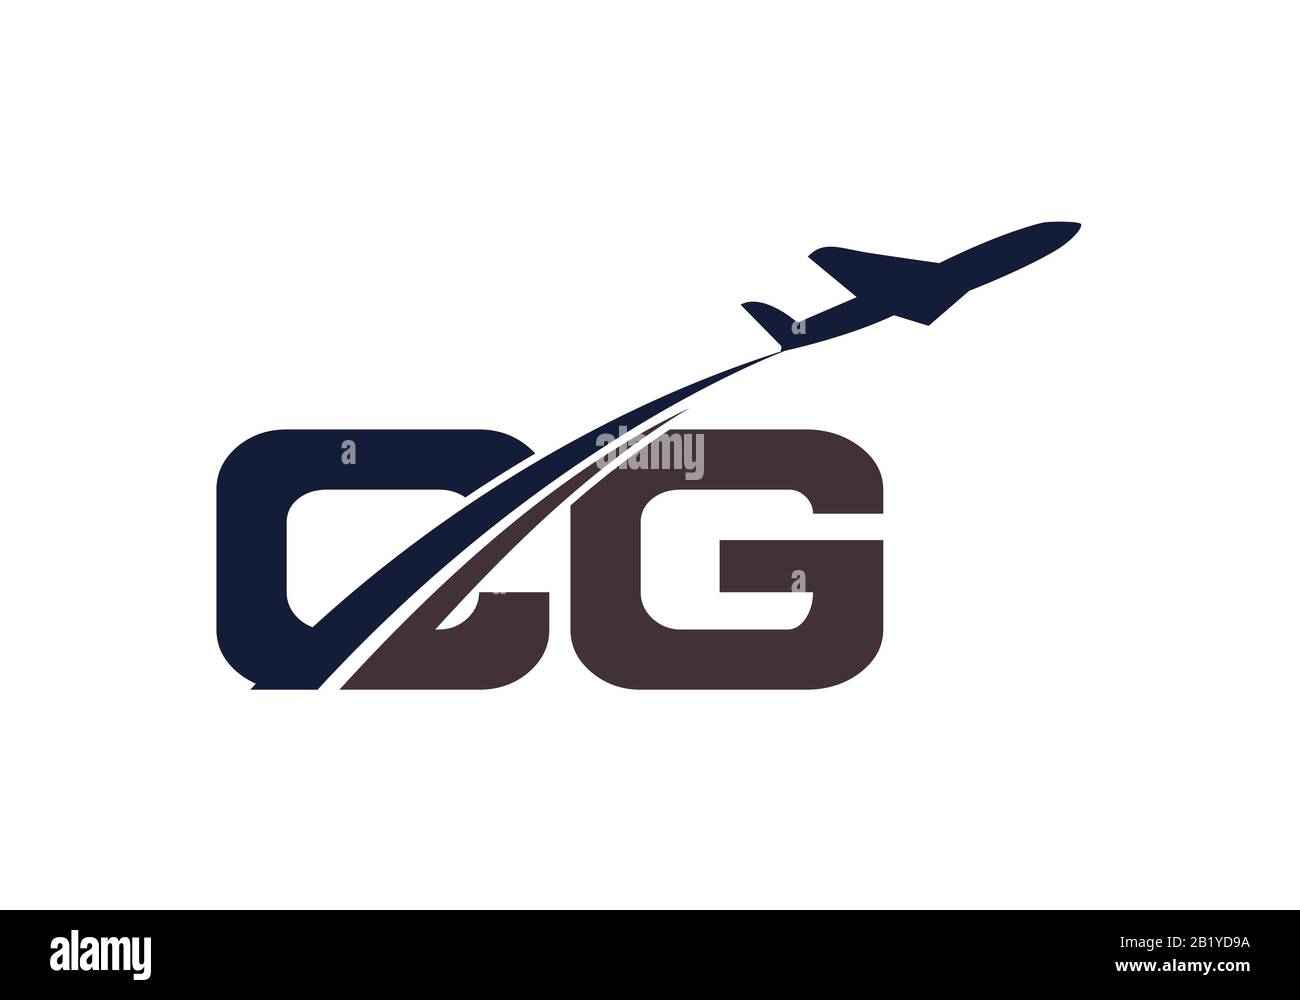 Initial Letter C and G  with Aviation Logo Design, Air, Airline, Airplane and Travel Logo template. Stock Vector